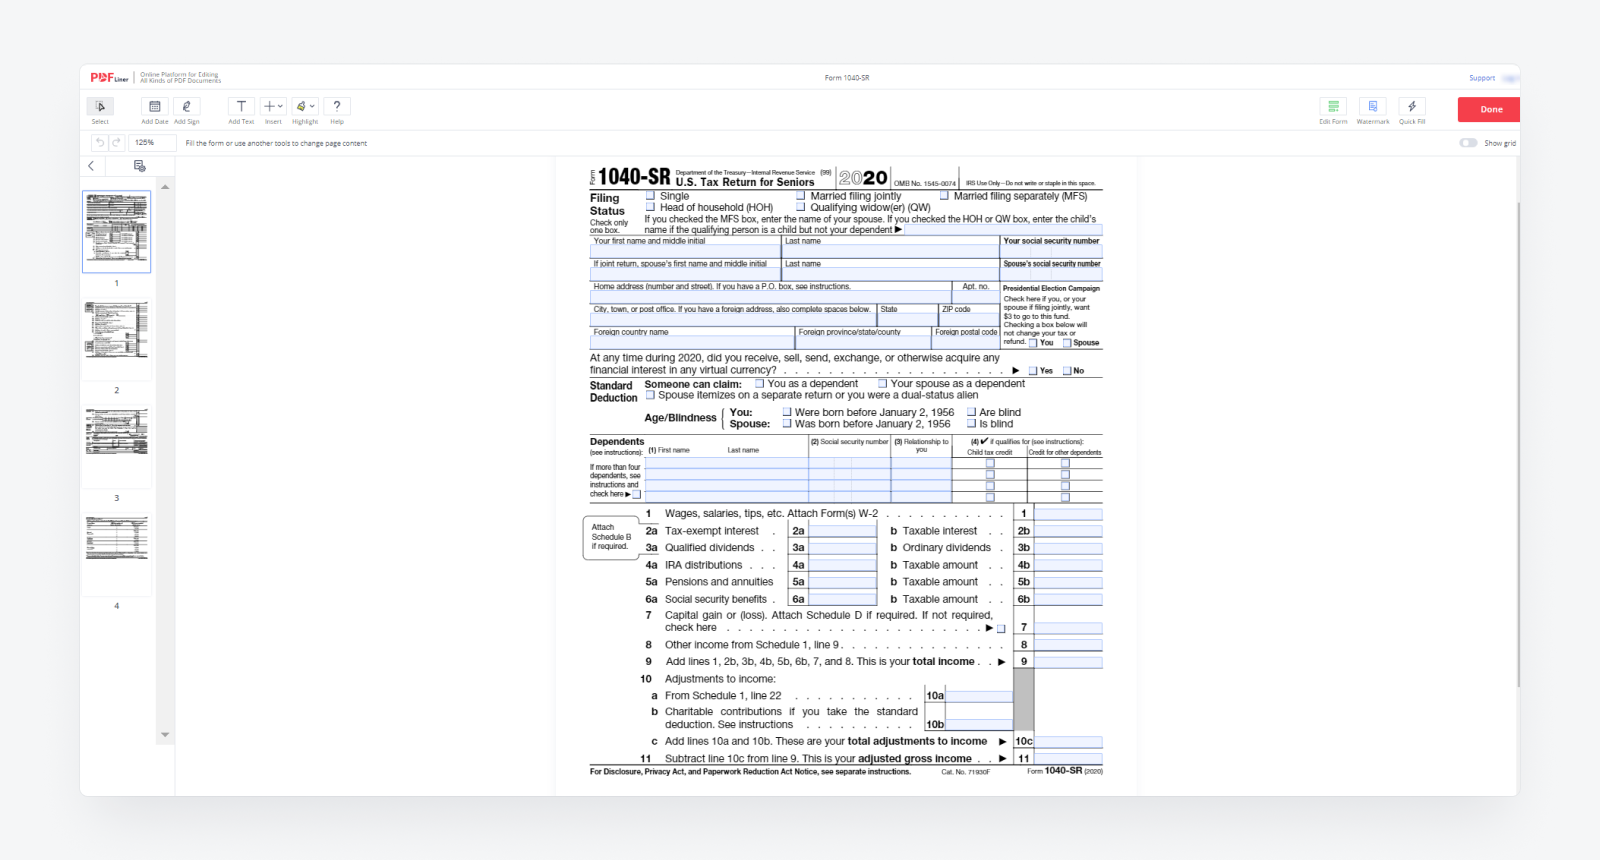 How to Fill Out Form 1040SR Expert Guide